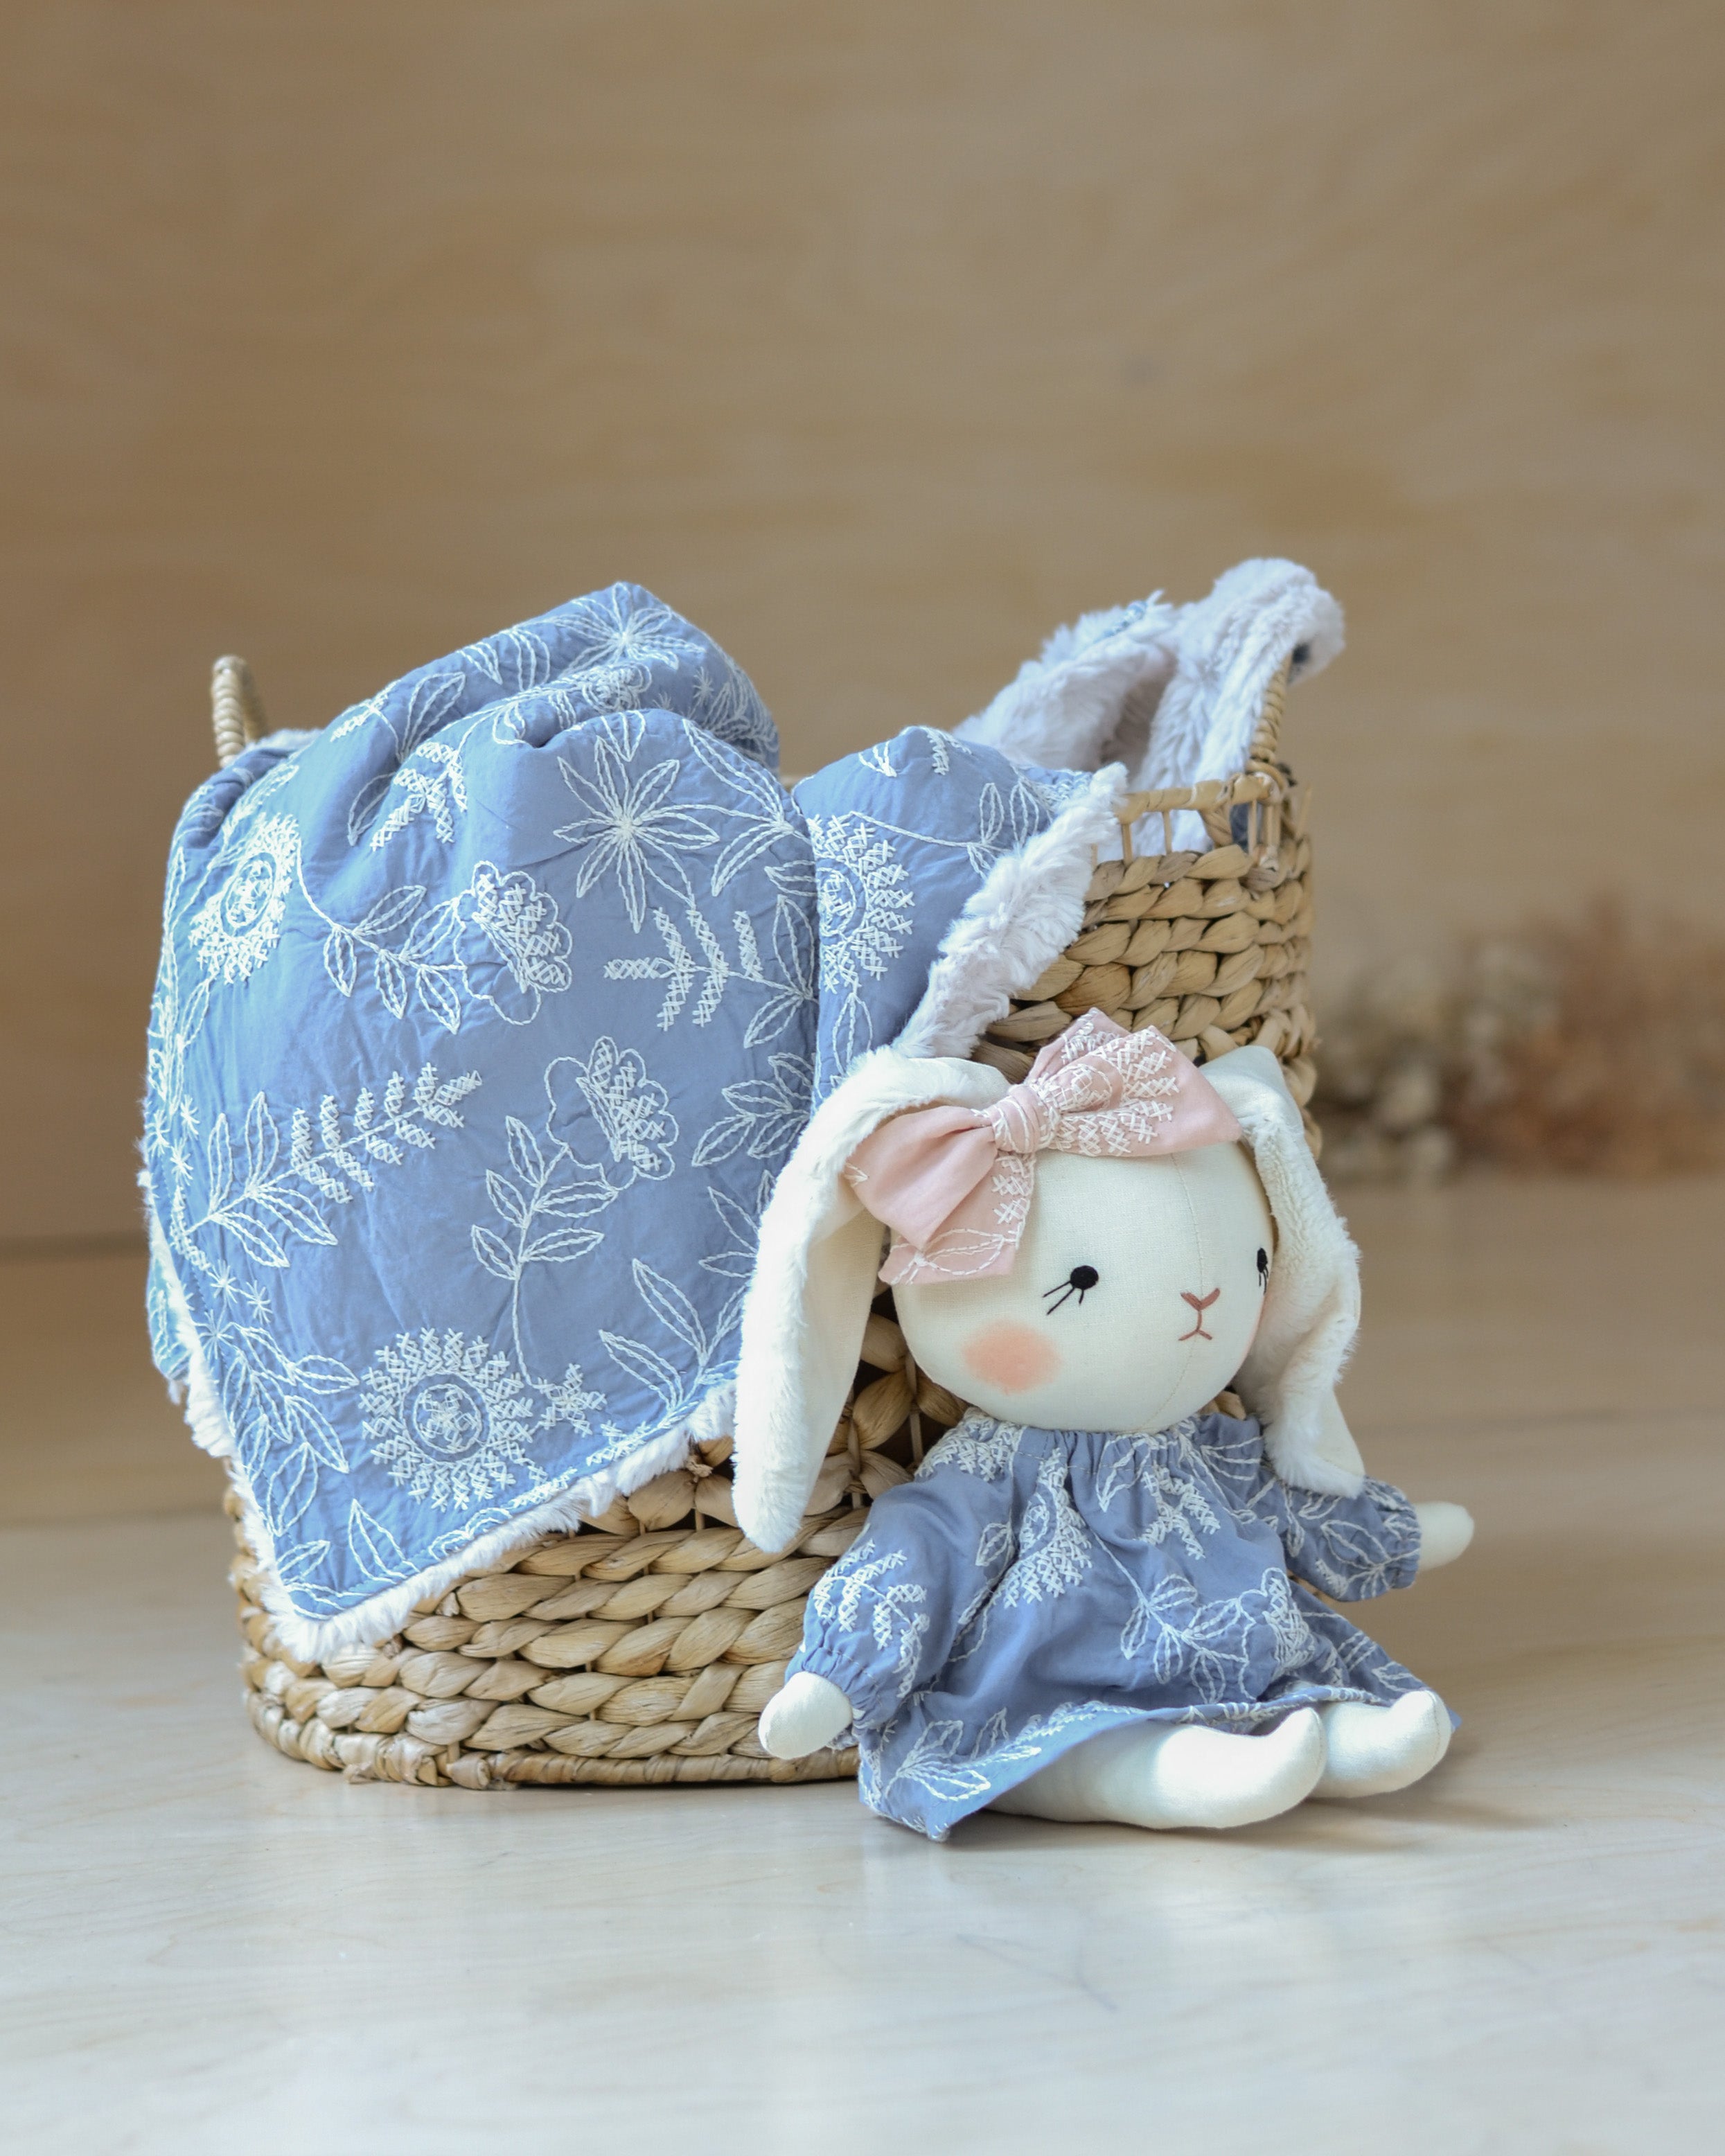 Bunny Soft Toy and Blanket set Blue embroidered floral